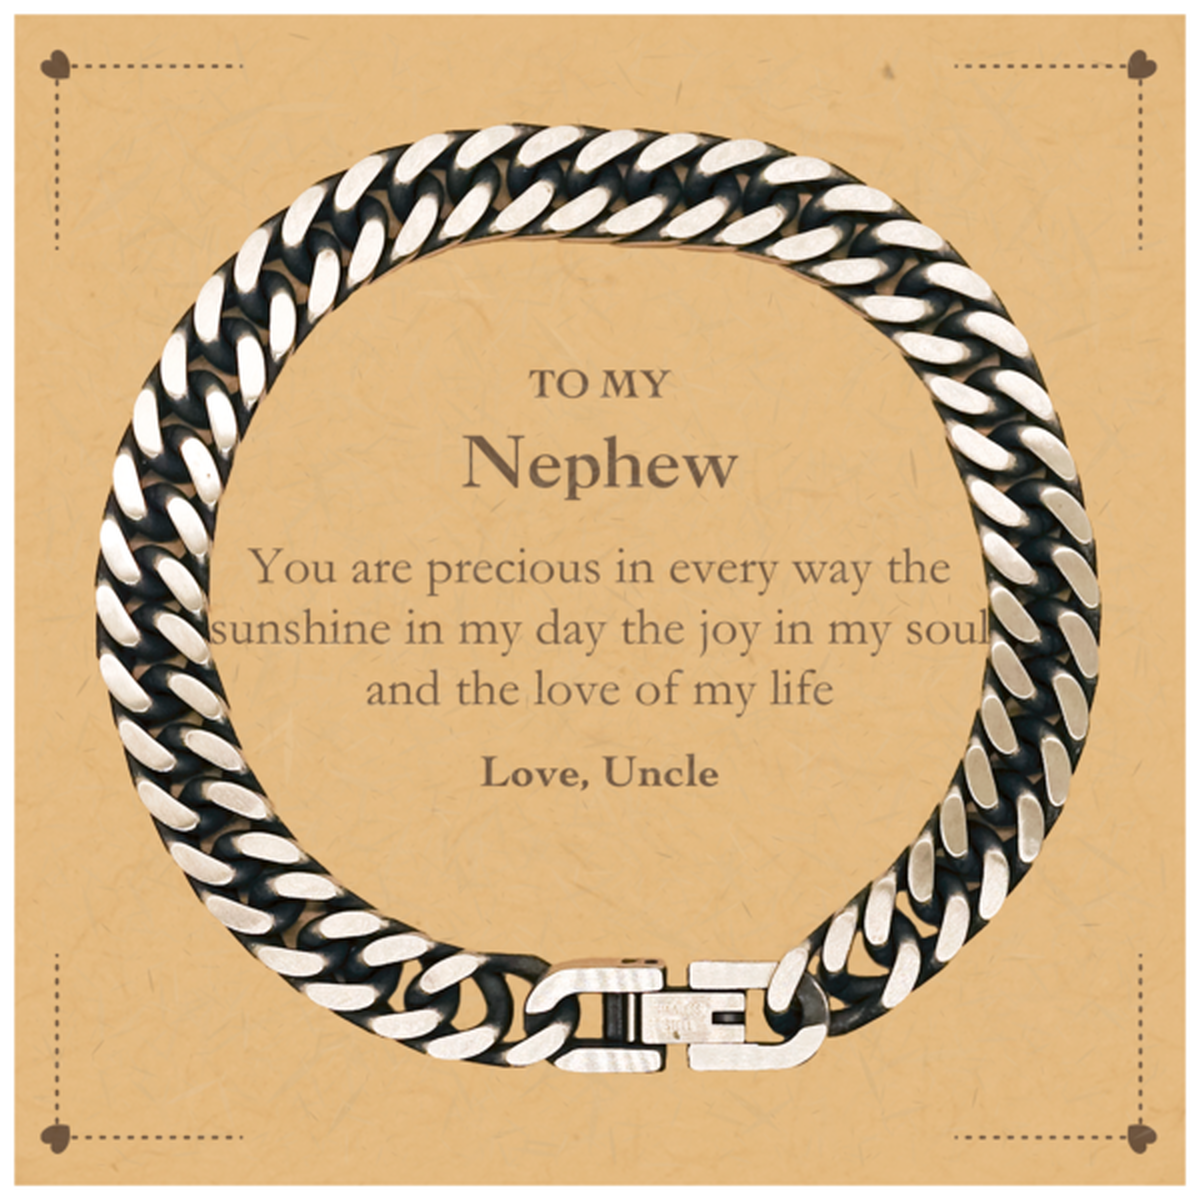 Graduation Gifts for Nephew Cuban Link Chain Bracelet Present from Uncle, Christmas Nephew Birthday Gifts Nephew You are precious in every way the sunshine in my day. Love, Uncle